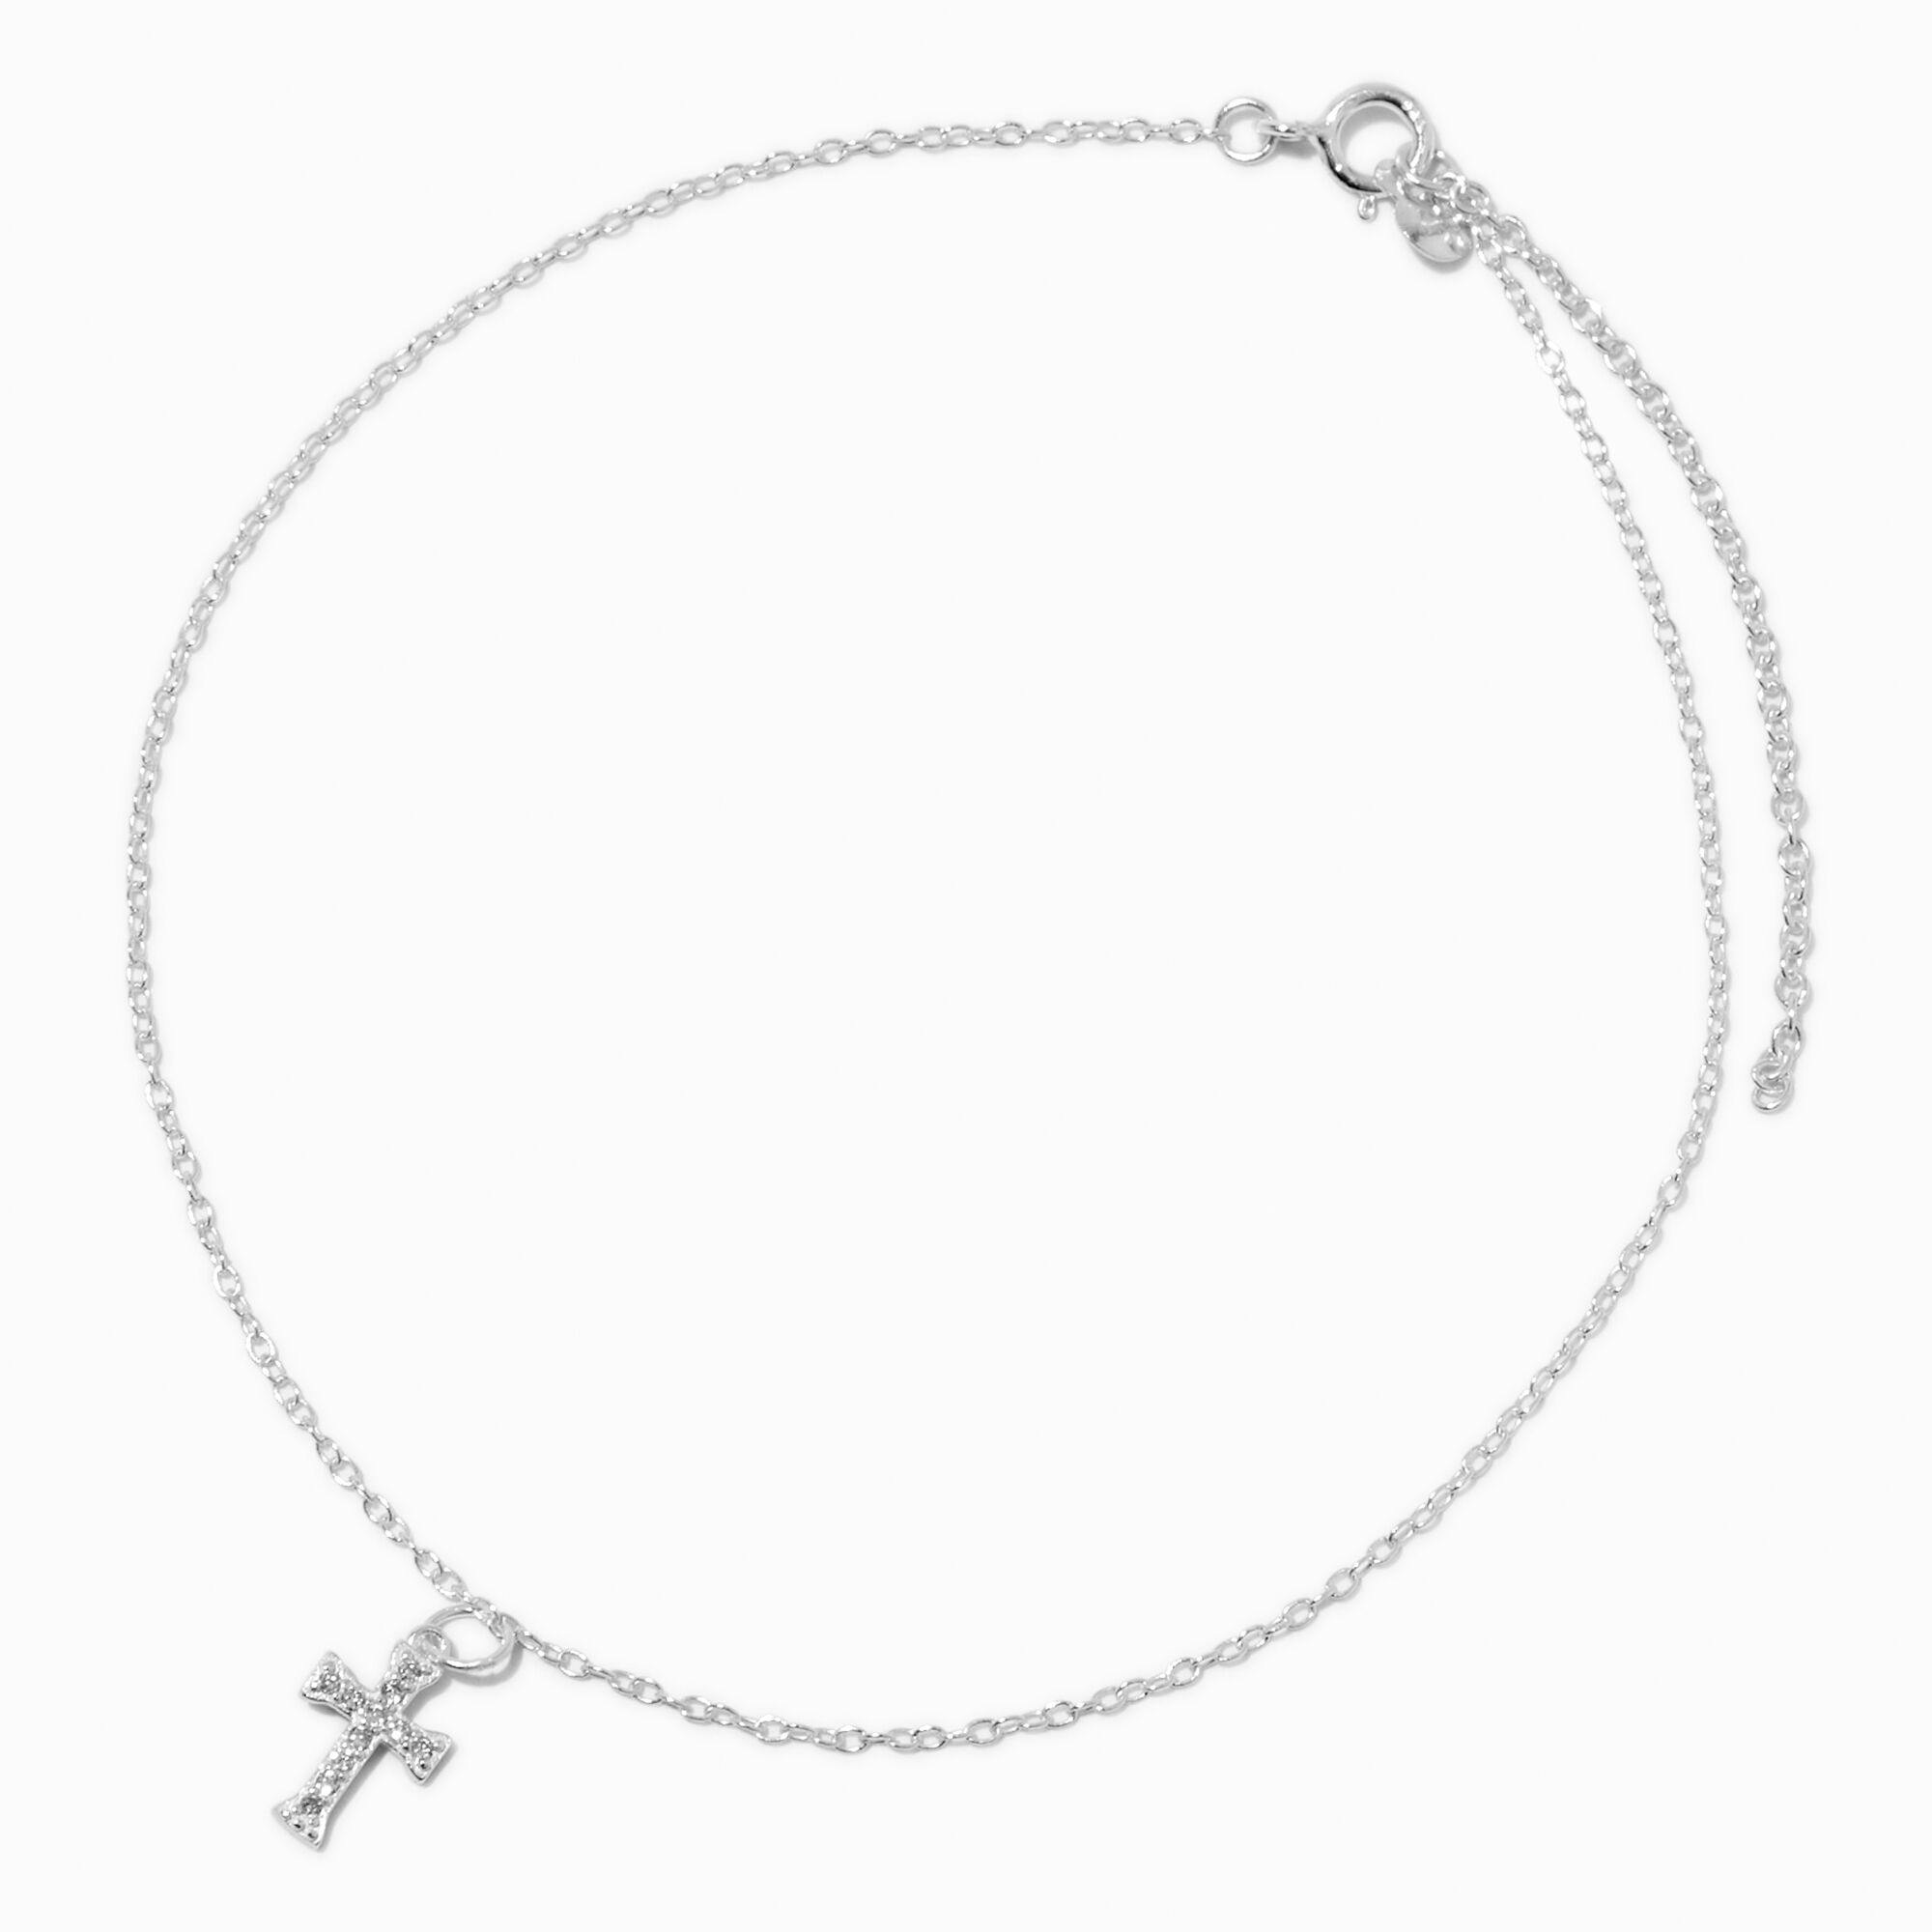 Gold Delicate Crystal Chain Anklets - 2 Pack | Claire's US